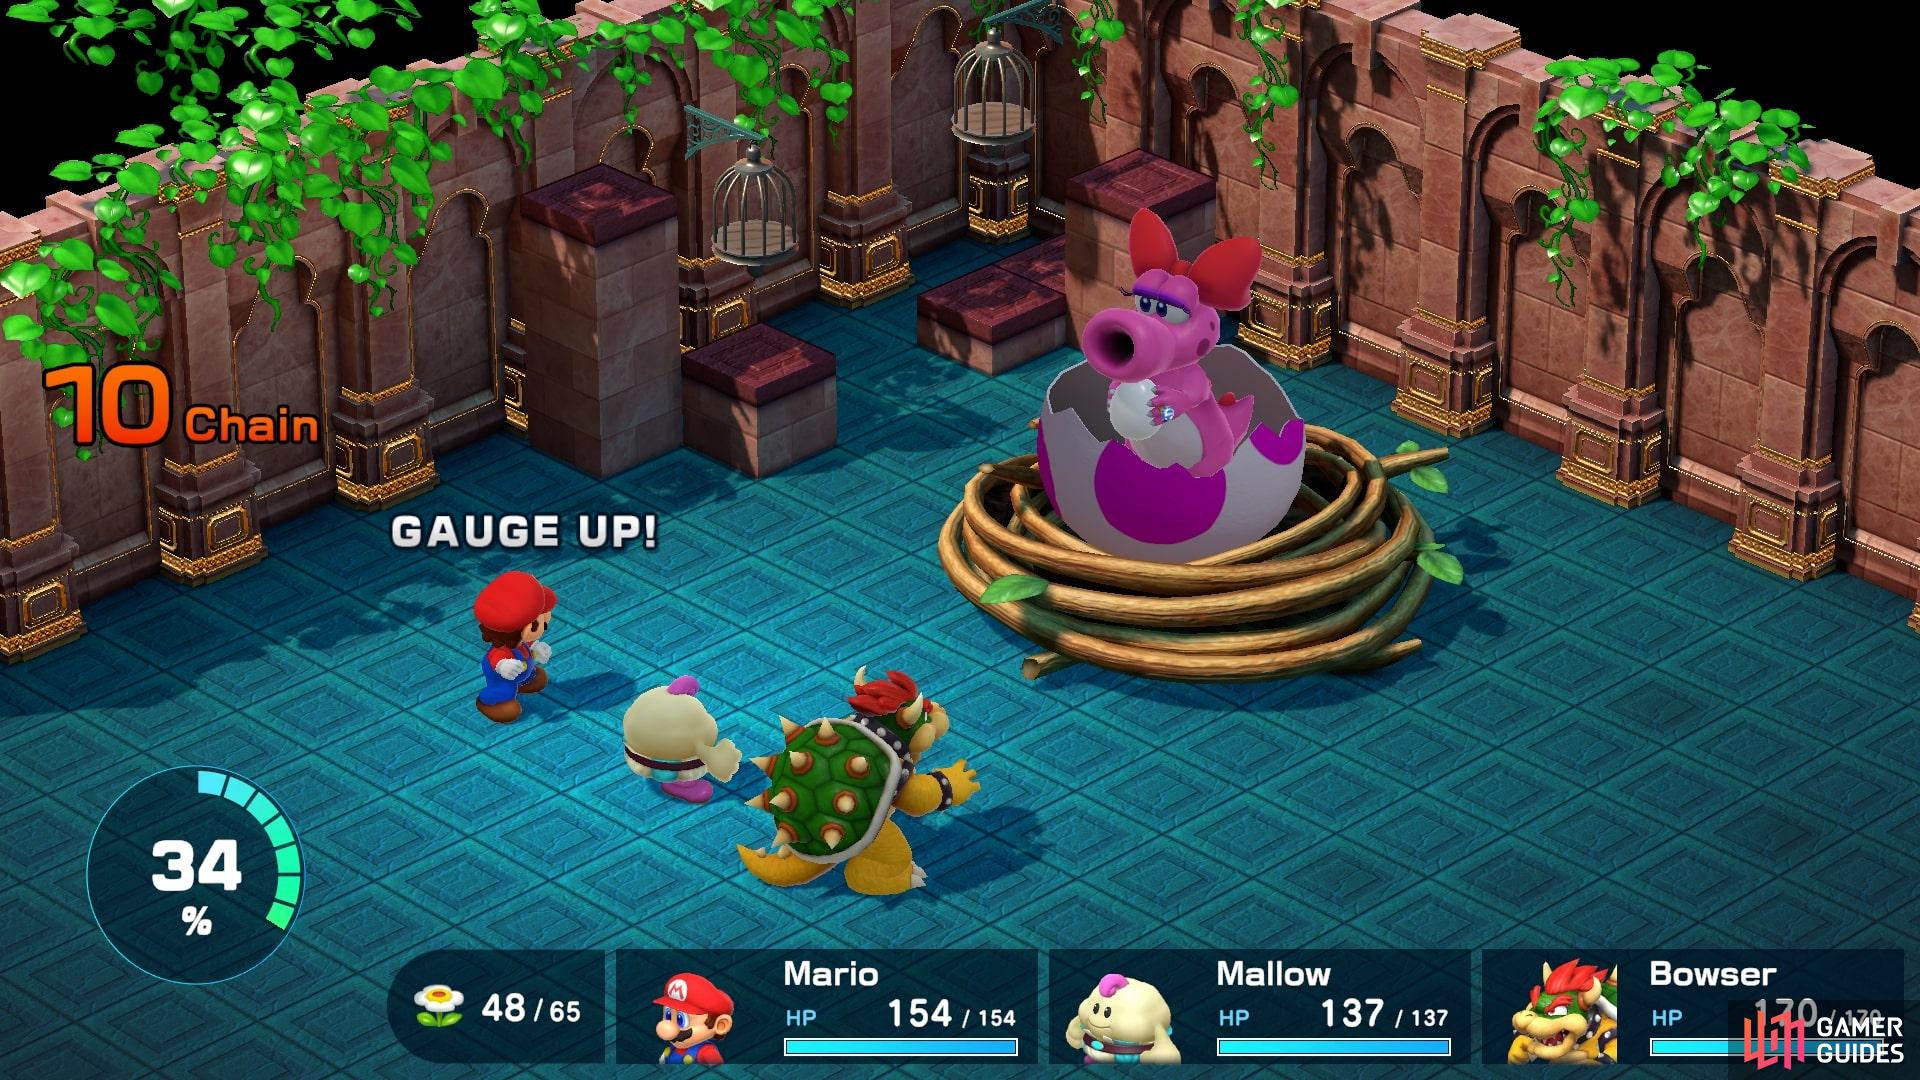 Once Birdo hatches she will use eggs to attack the party.